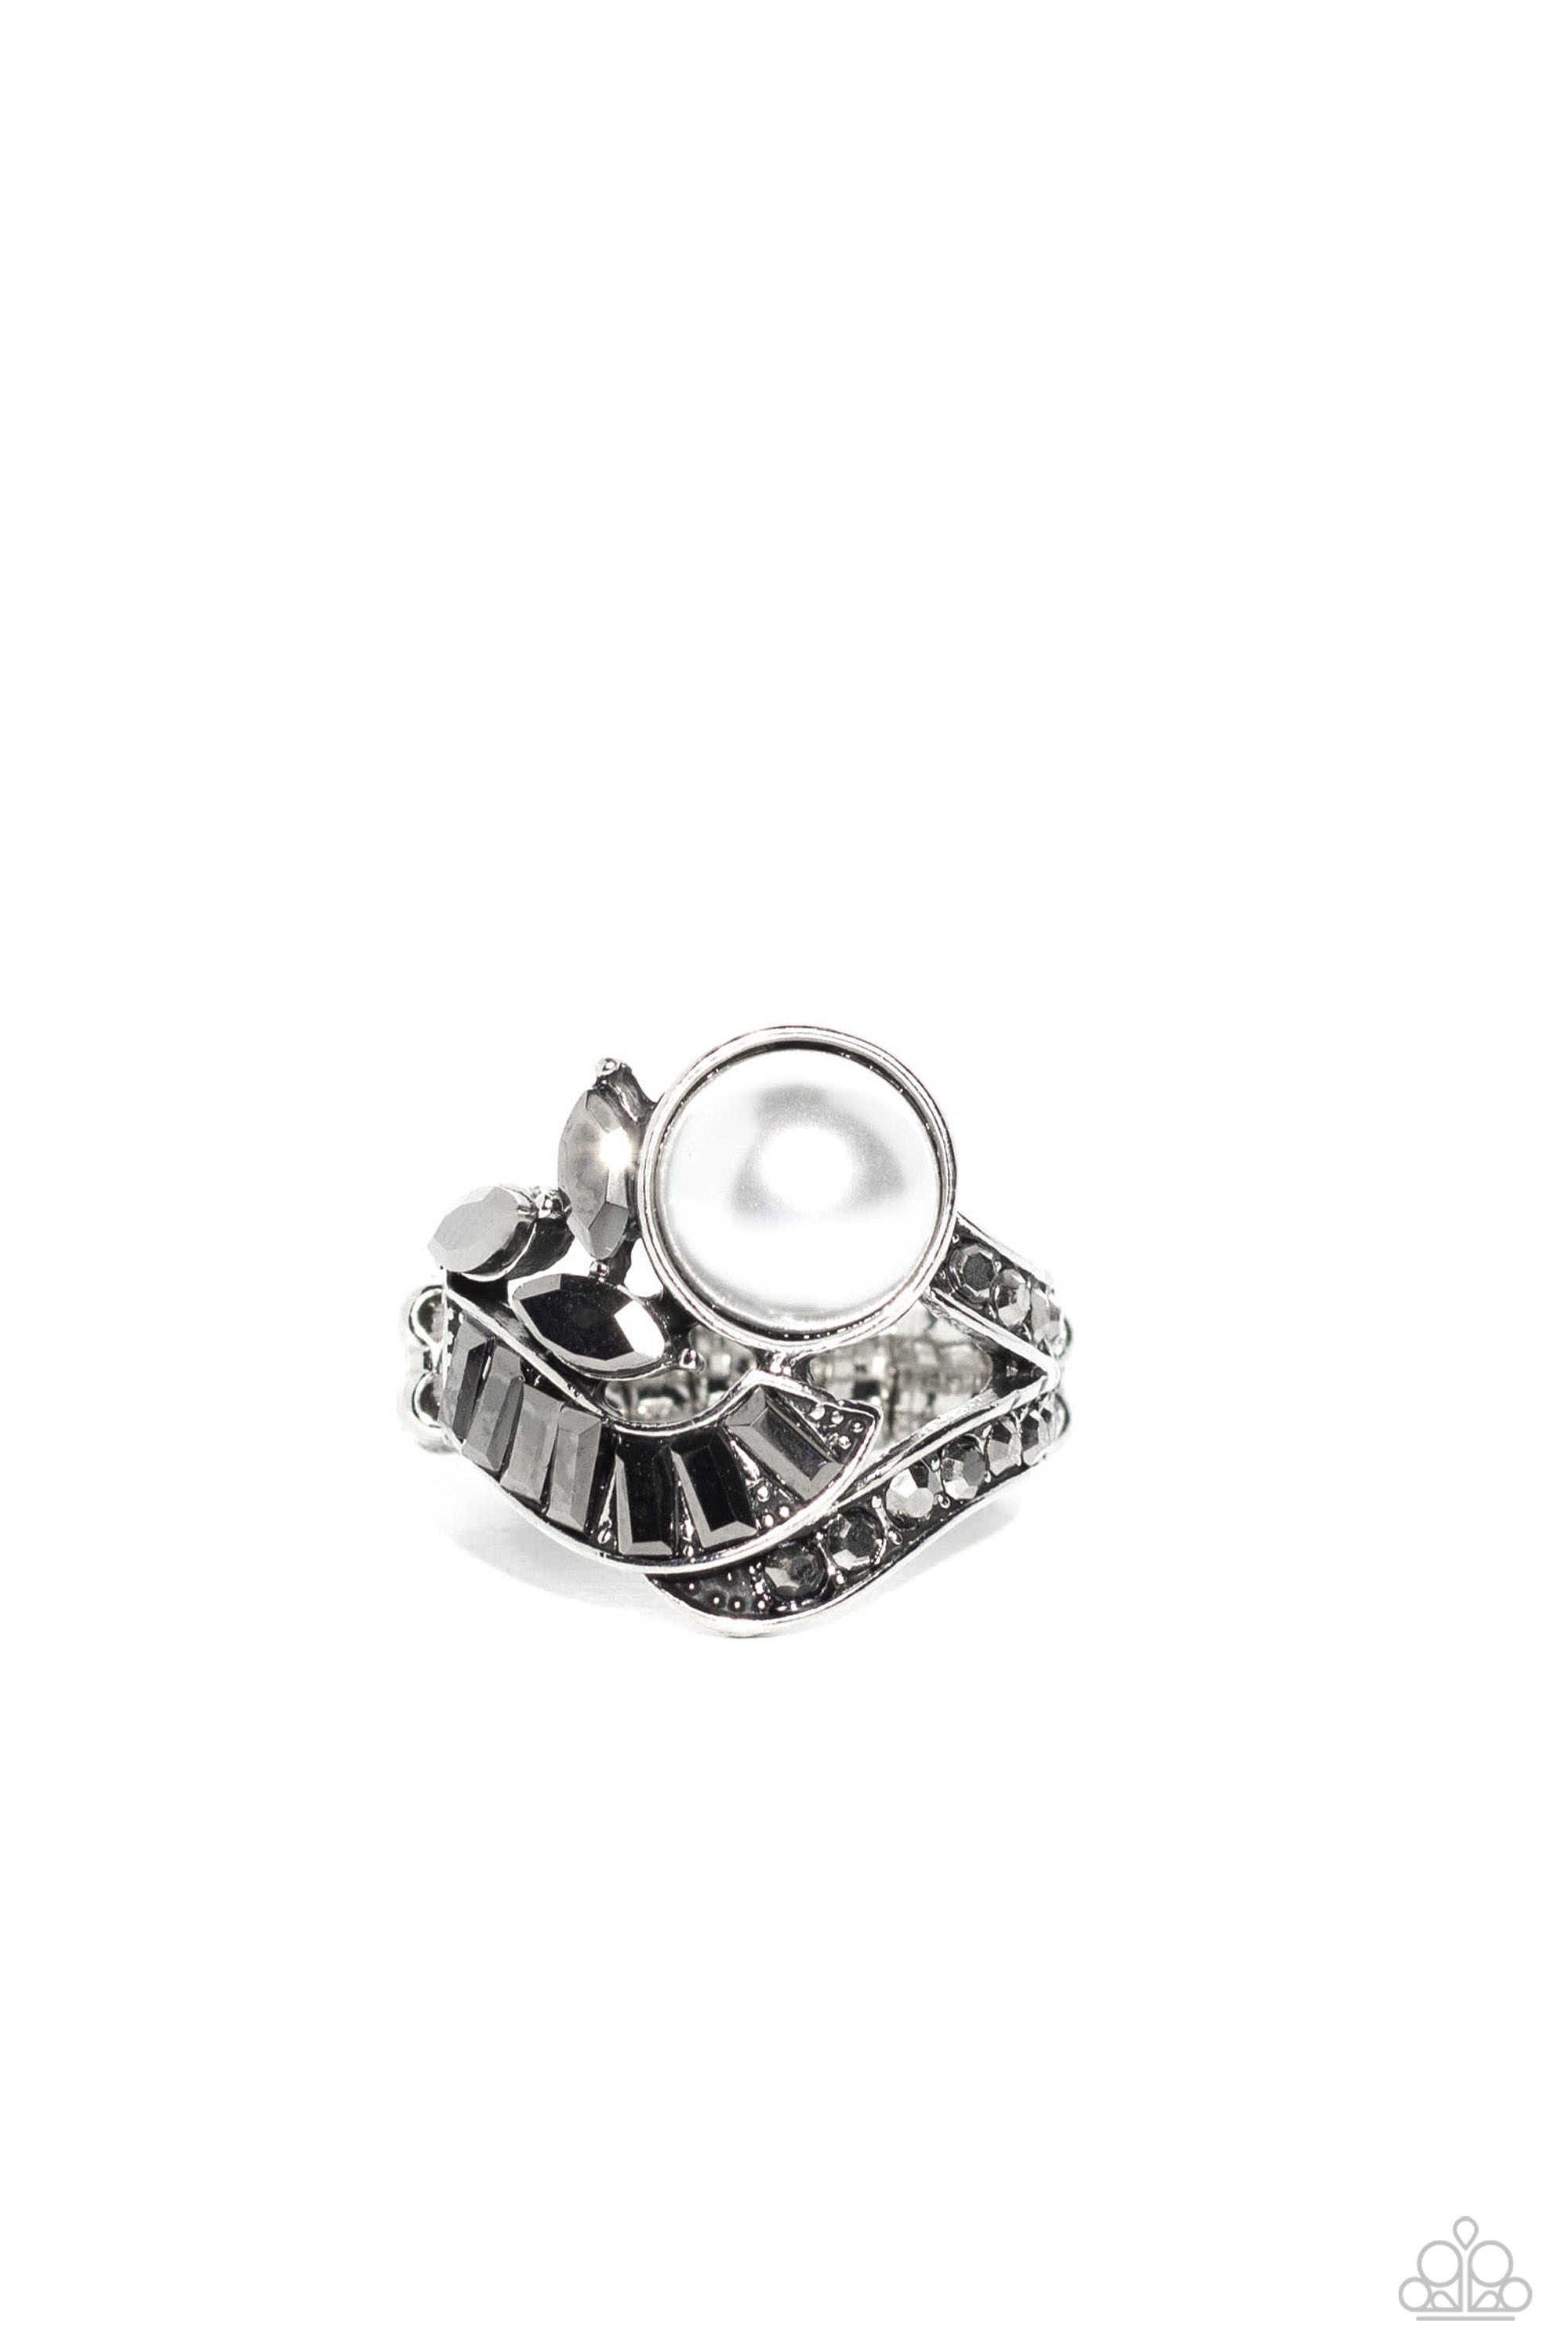 SELFIE-Made Millionaire Silver & White Pearl Ring - Paparazzi Accessories- lightbox - CarasShop.com - $5 Jewelry by Cara Jewels